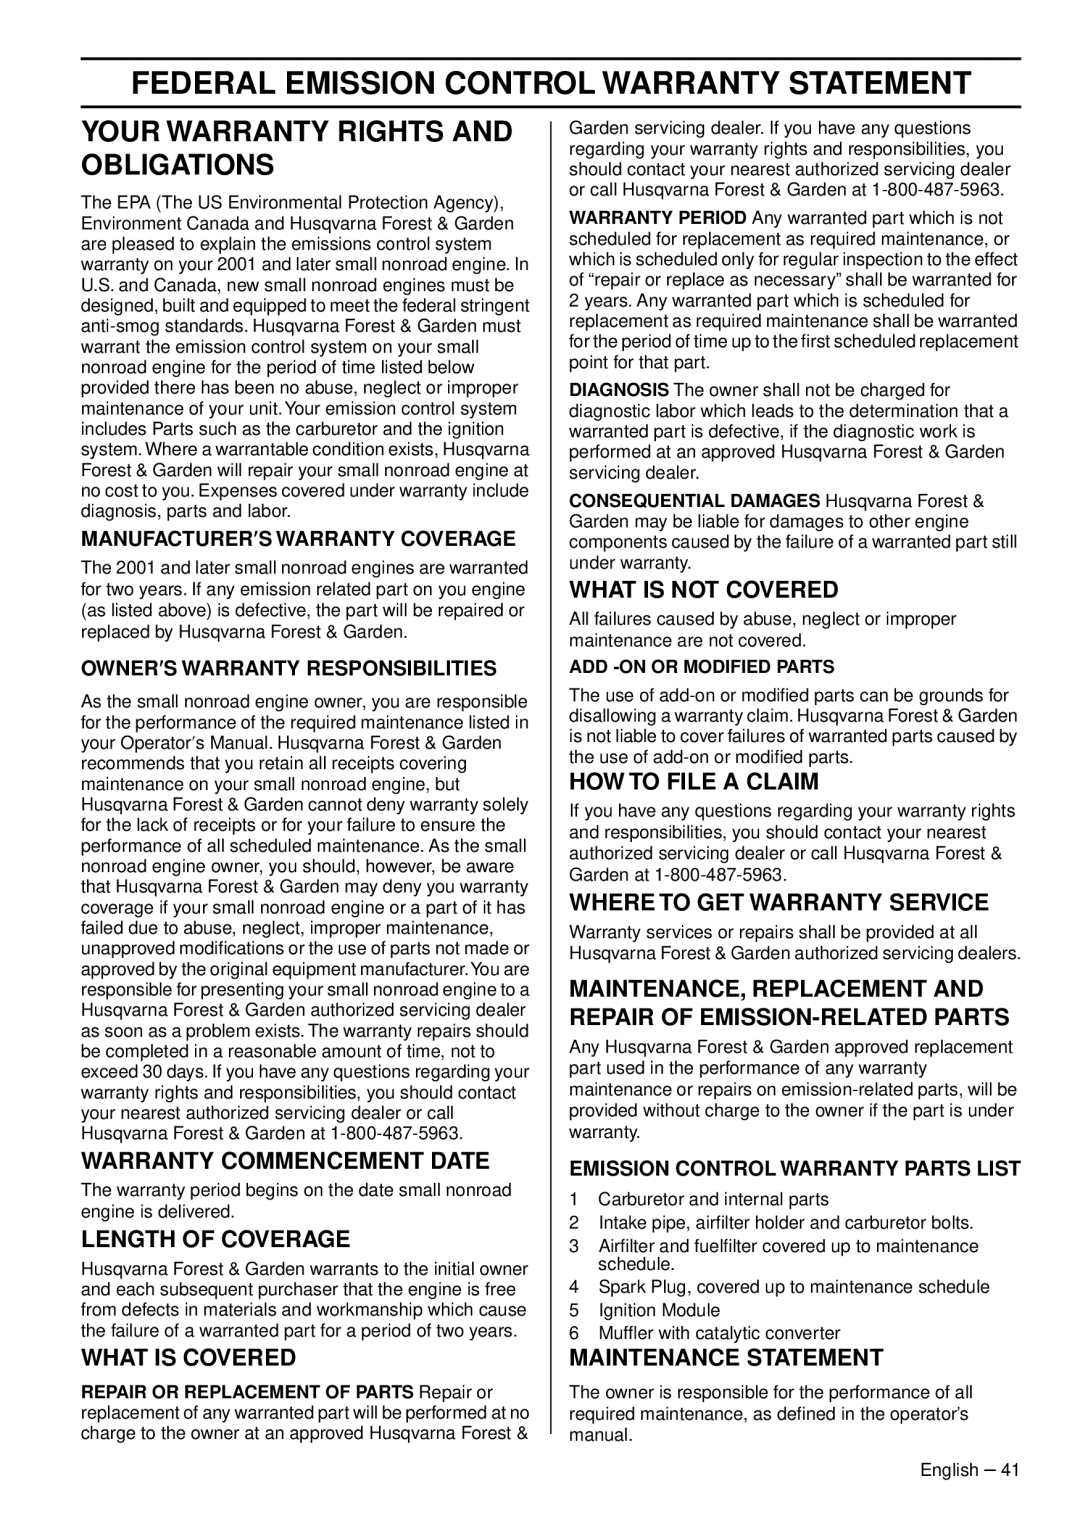 Husqvarna 1153178-95 Federal Emission Control Warranty Statement, Your Warranty Rights And Obligations, Length Of Coverage 